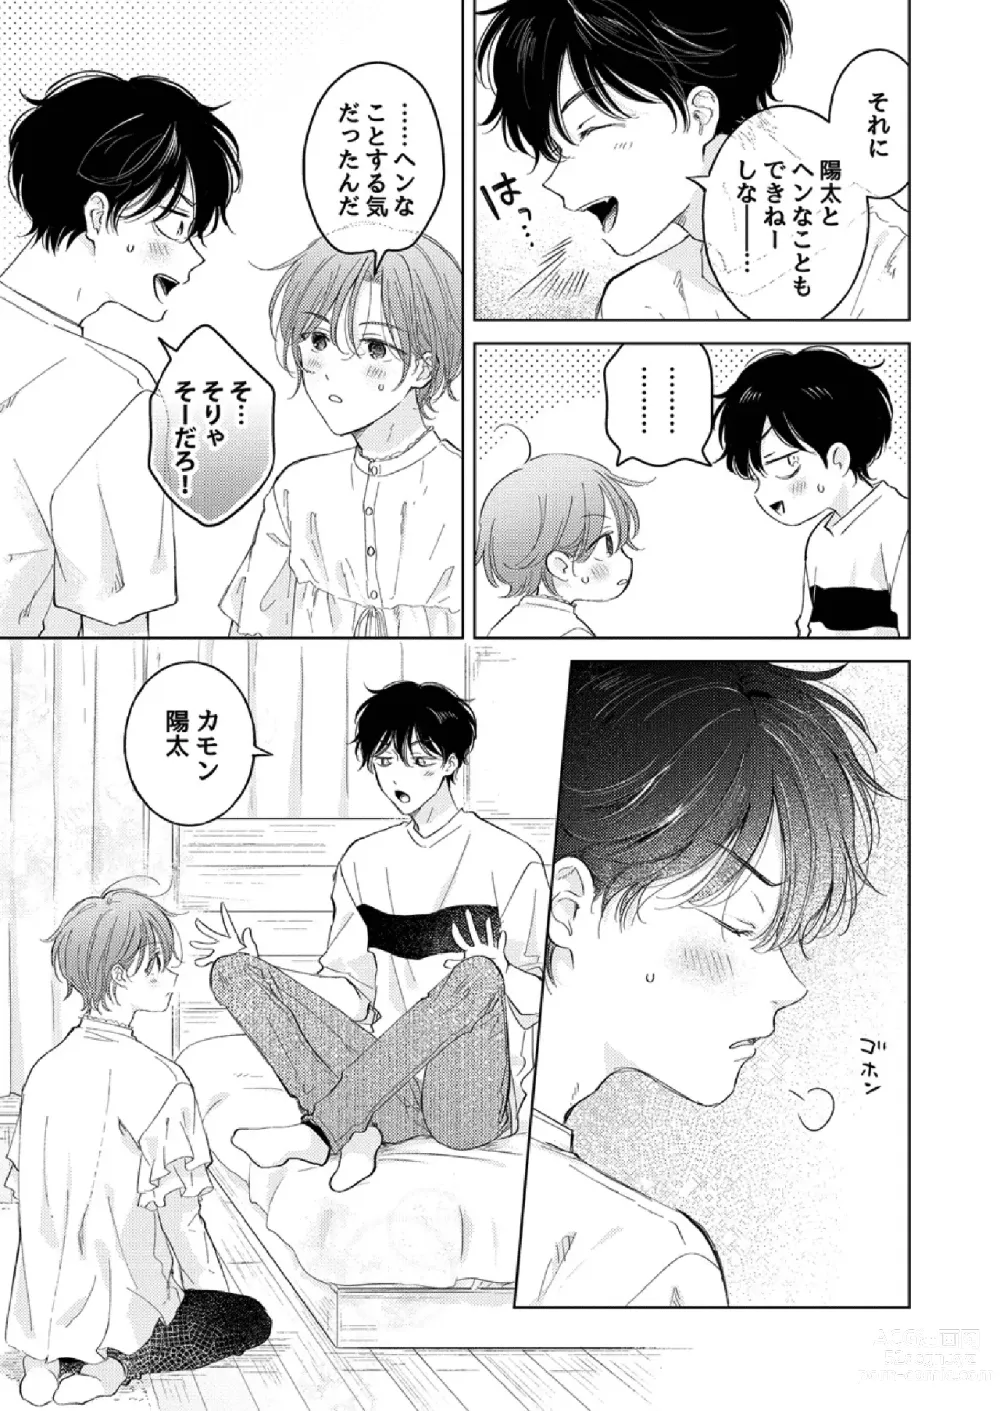 Page 11 of doujinshi How to use Gender-Changing Apps Properly 2